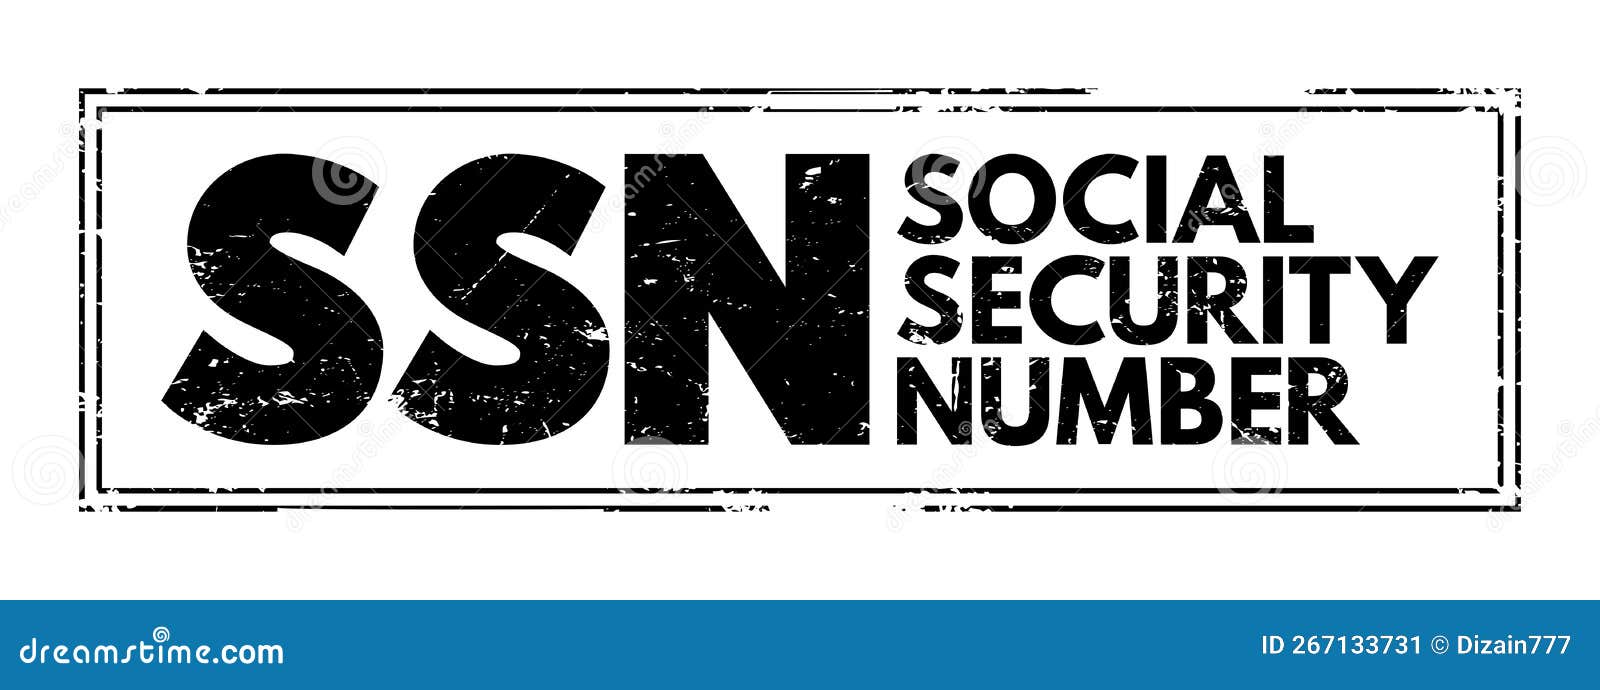 ssn - social security number acronym text stamp, concept background